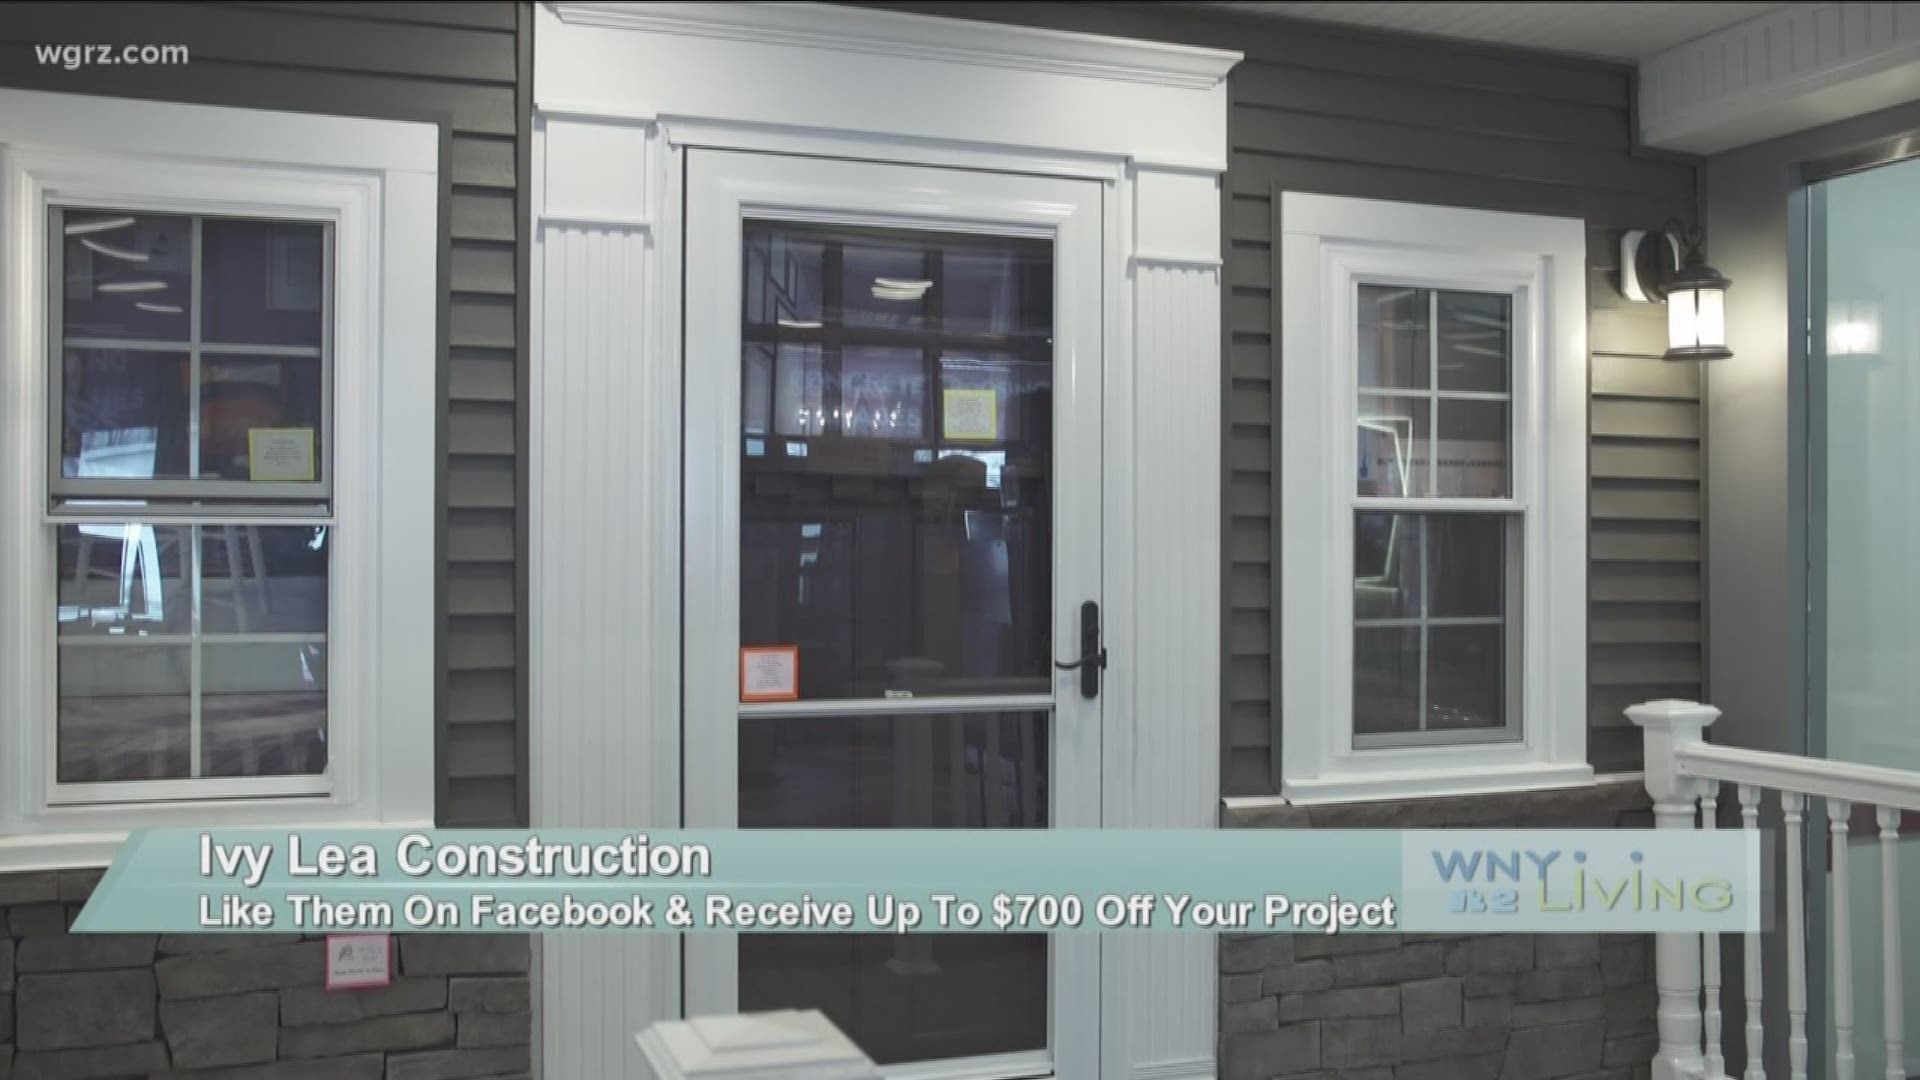 WNY Living - May 11 - Ivy Lea Construction (SPONSORED CONTENT)